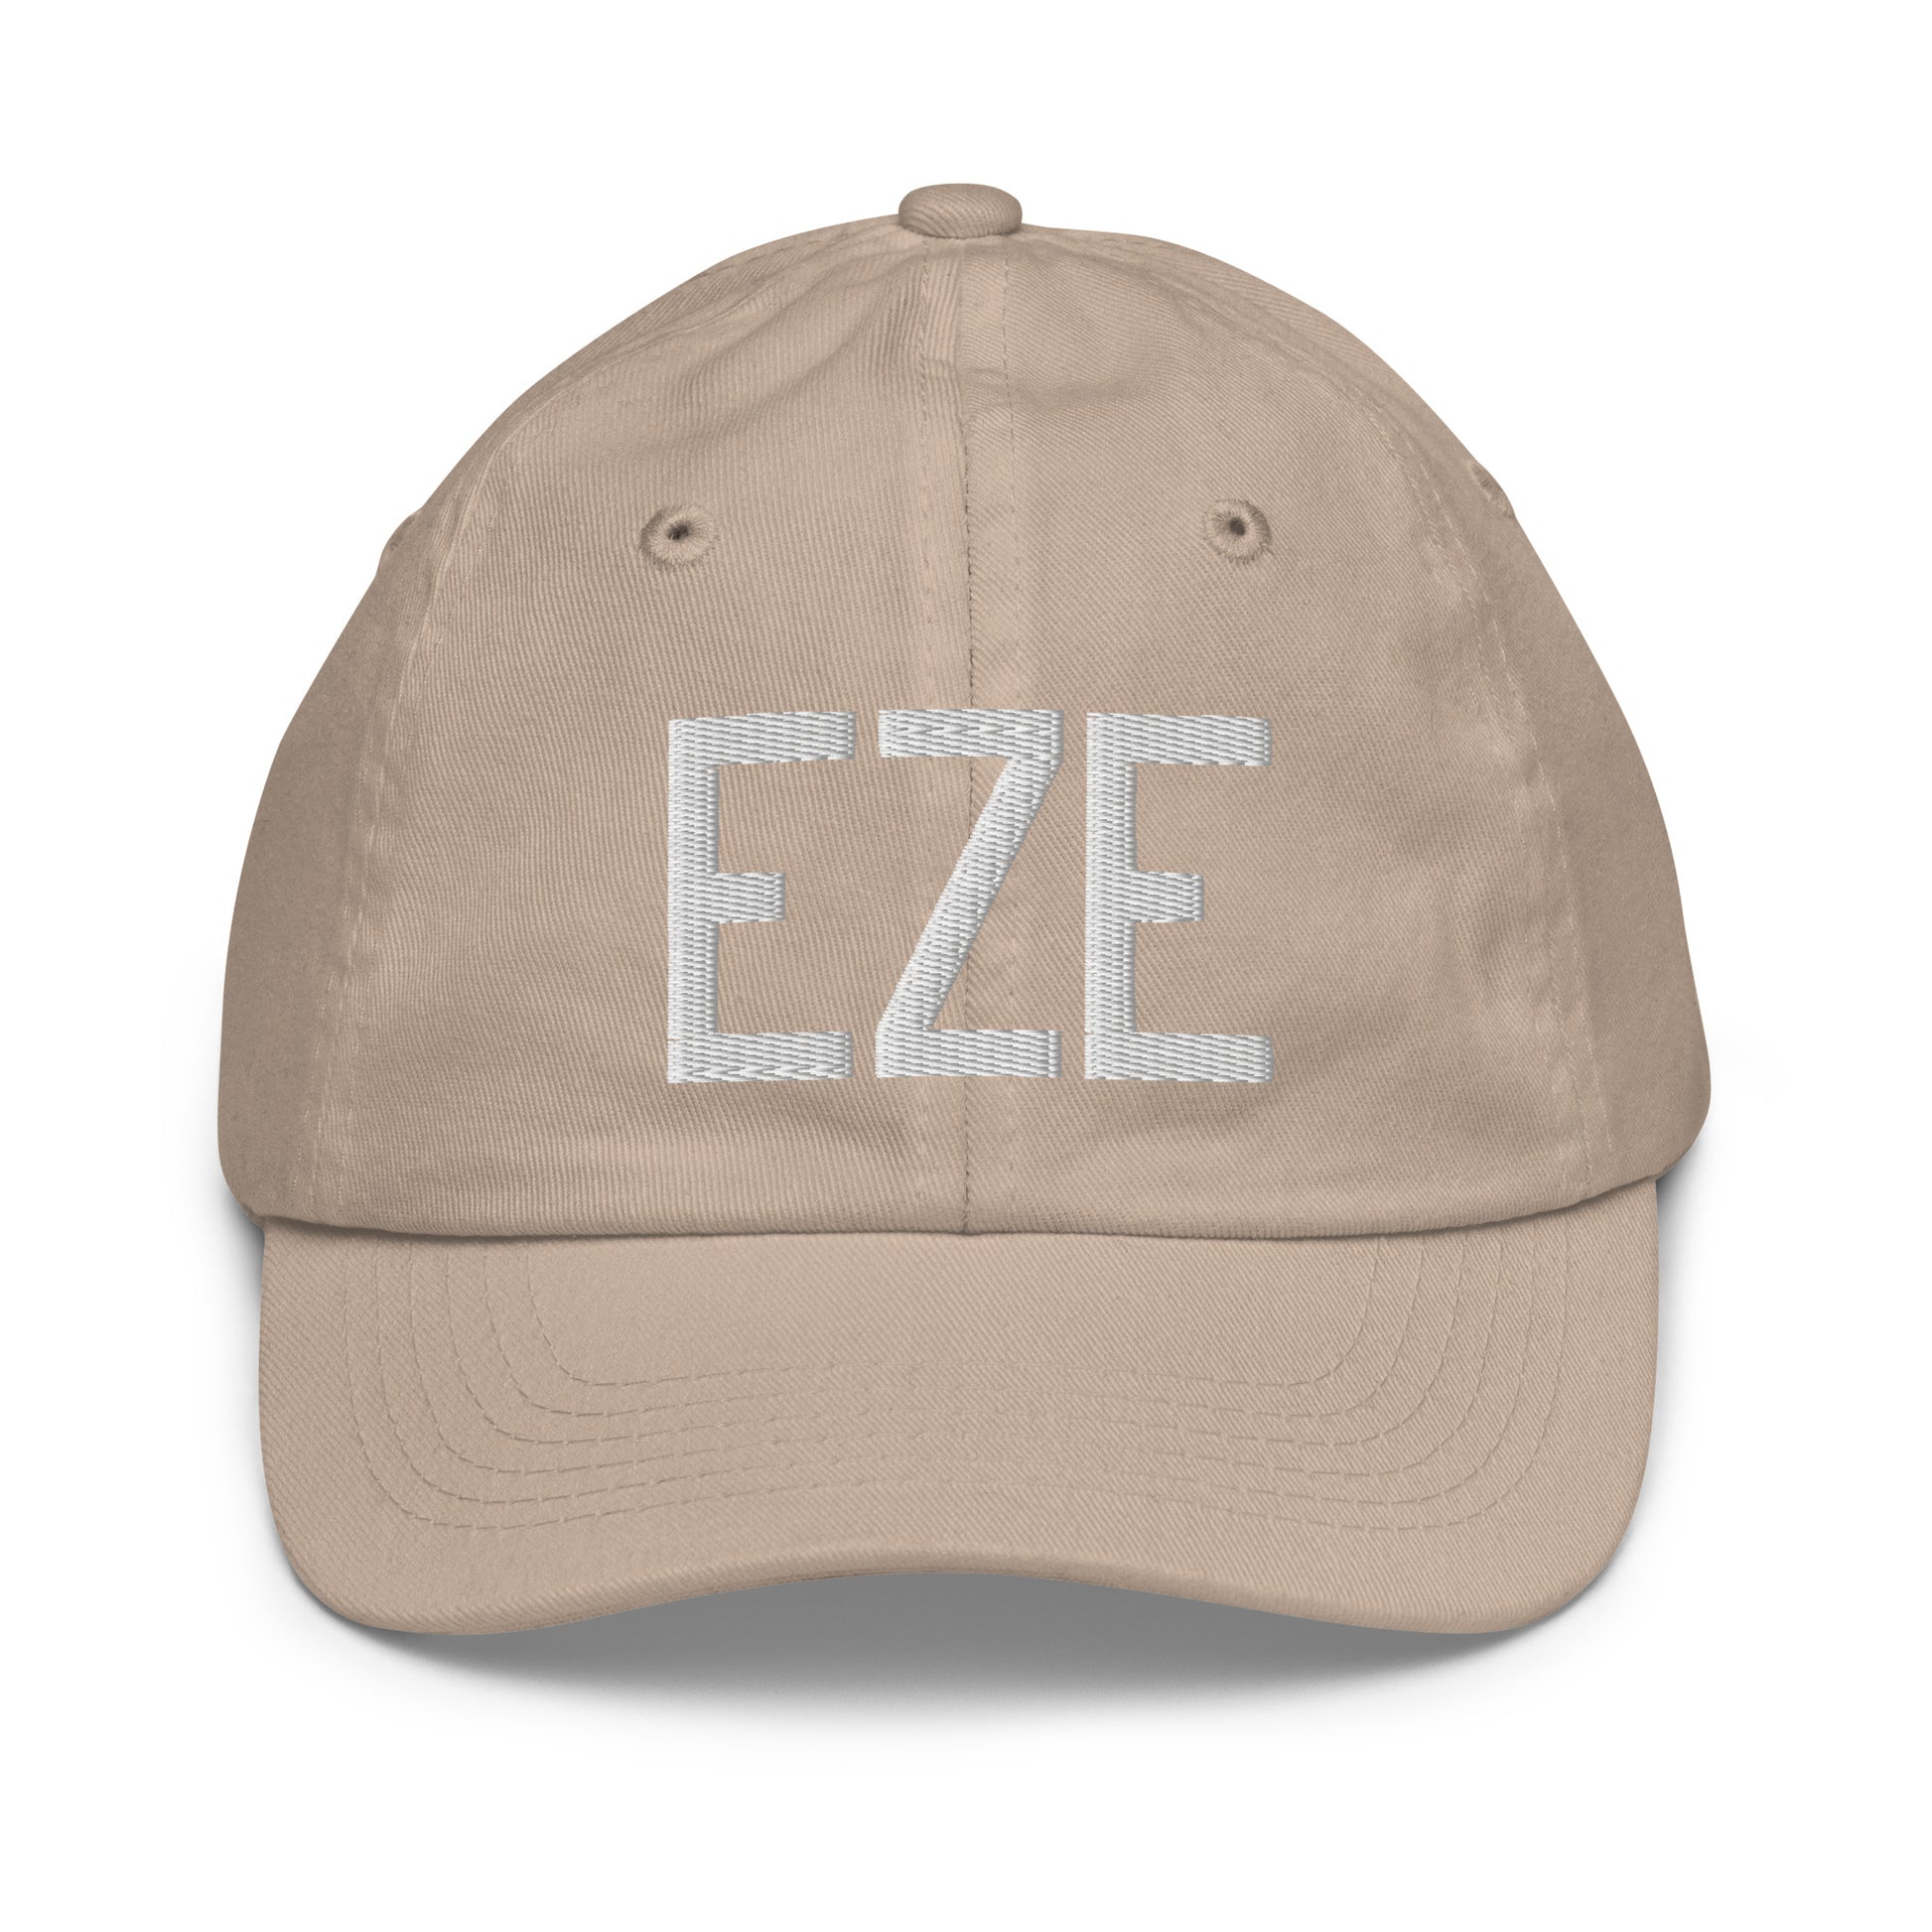 Airport Code Kid's Baseball Cap - White • EZE Buenos Aires • YHM Designs - Image 28